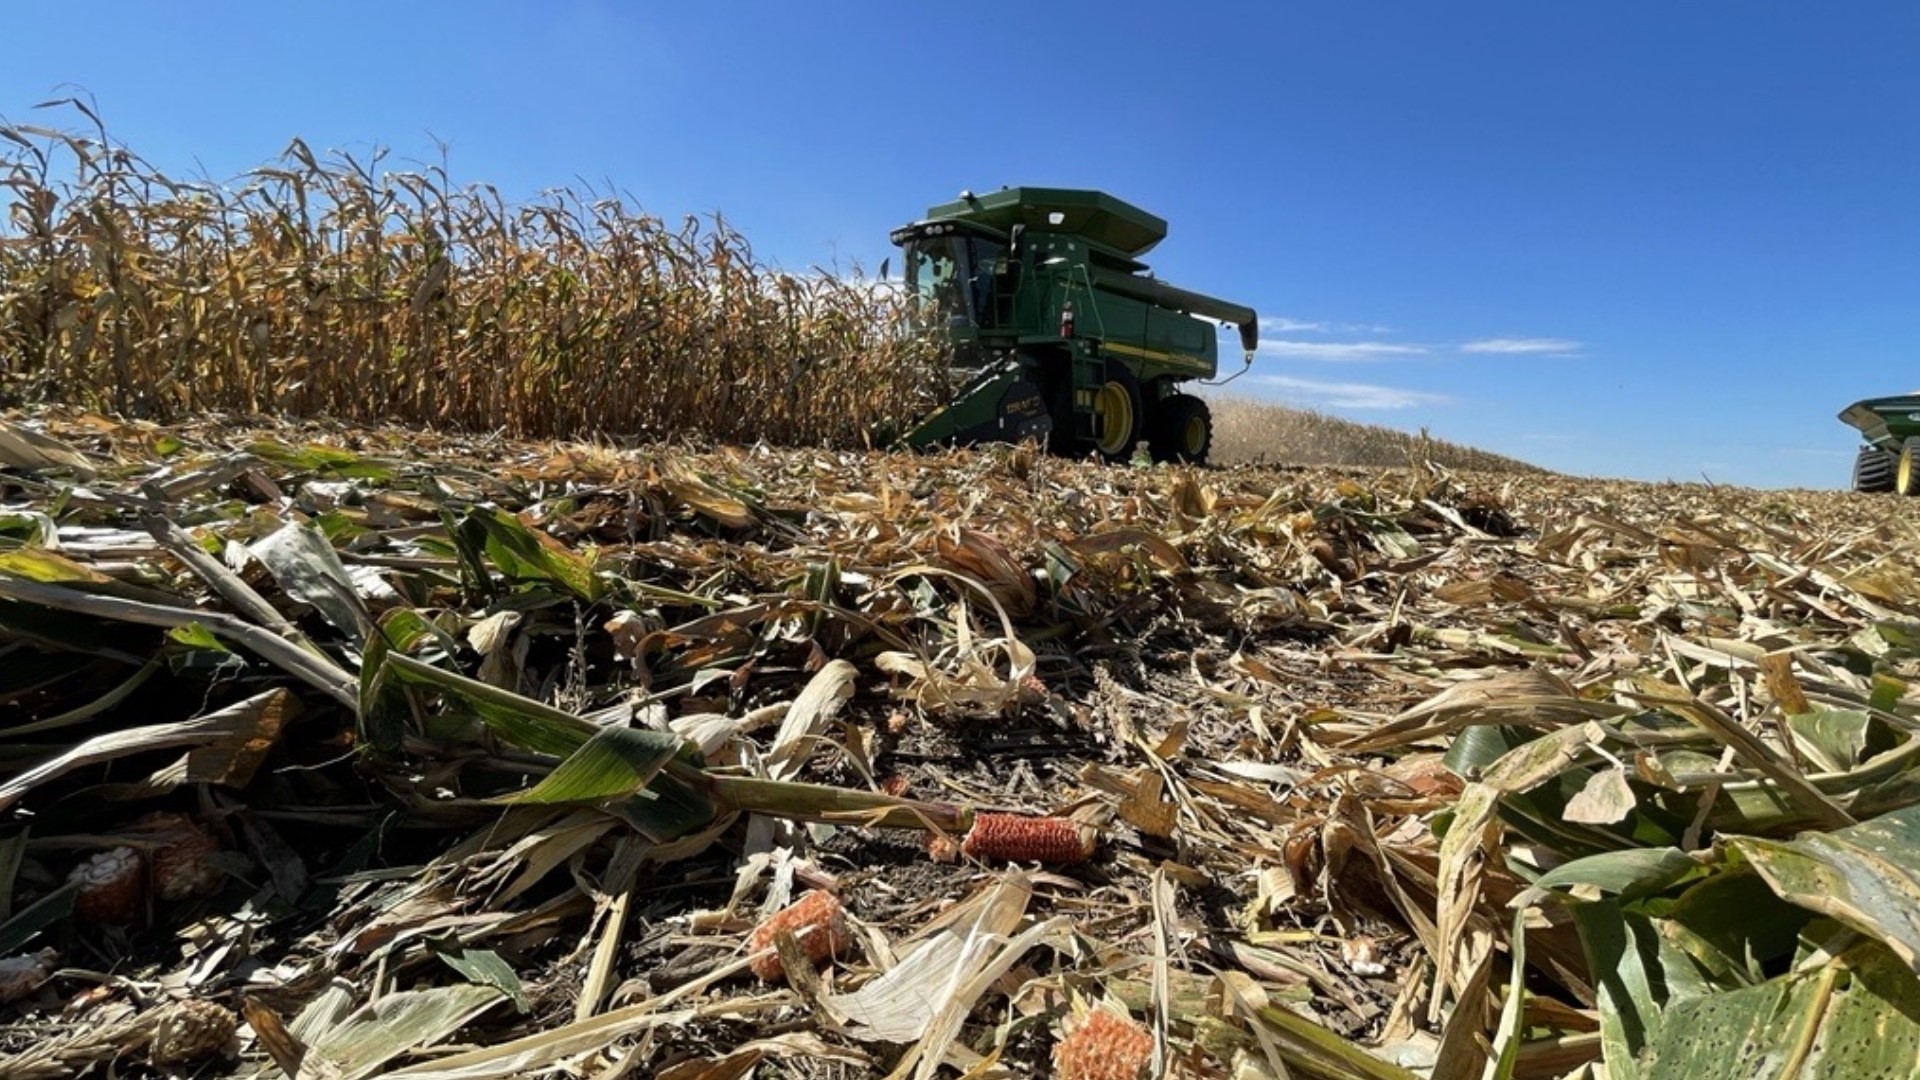 After a cold and rainy spring, near perfect summer growing conditions have led to a banner corn year. But area farmers say that good news might not last.